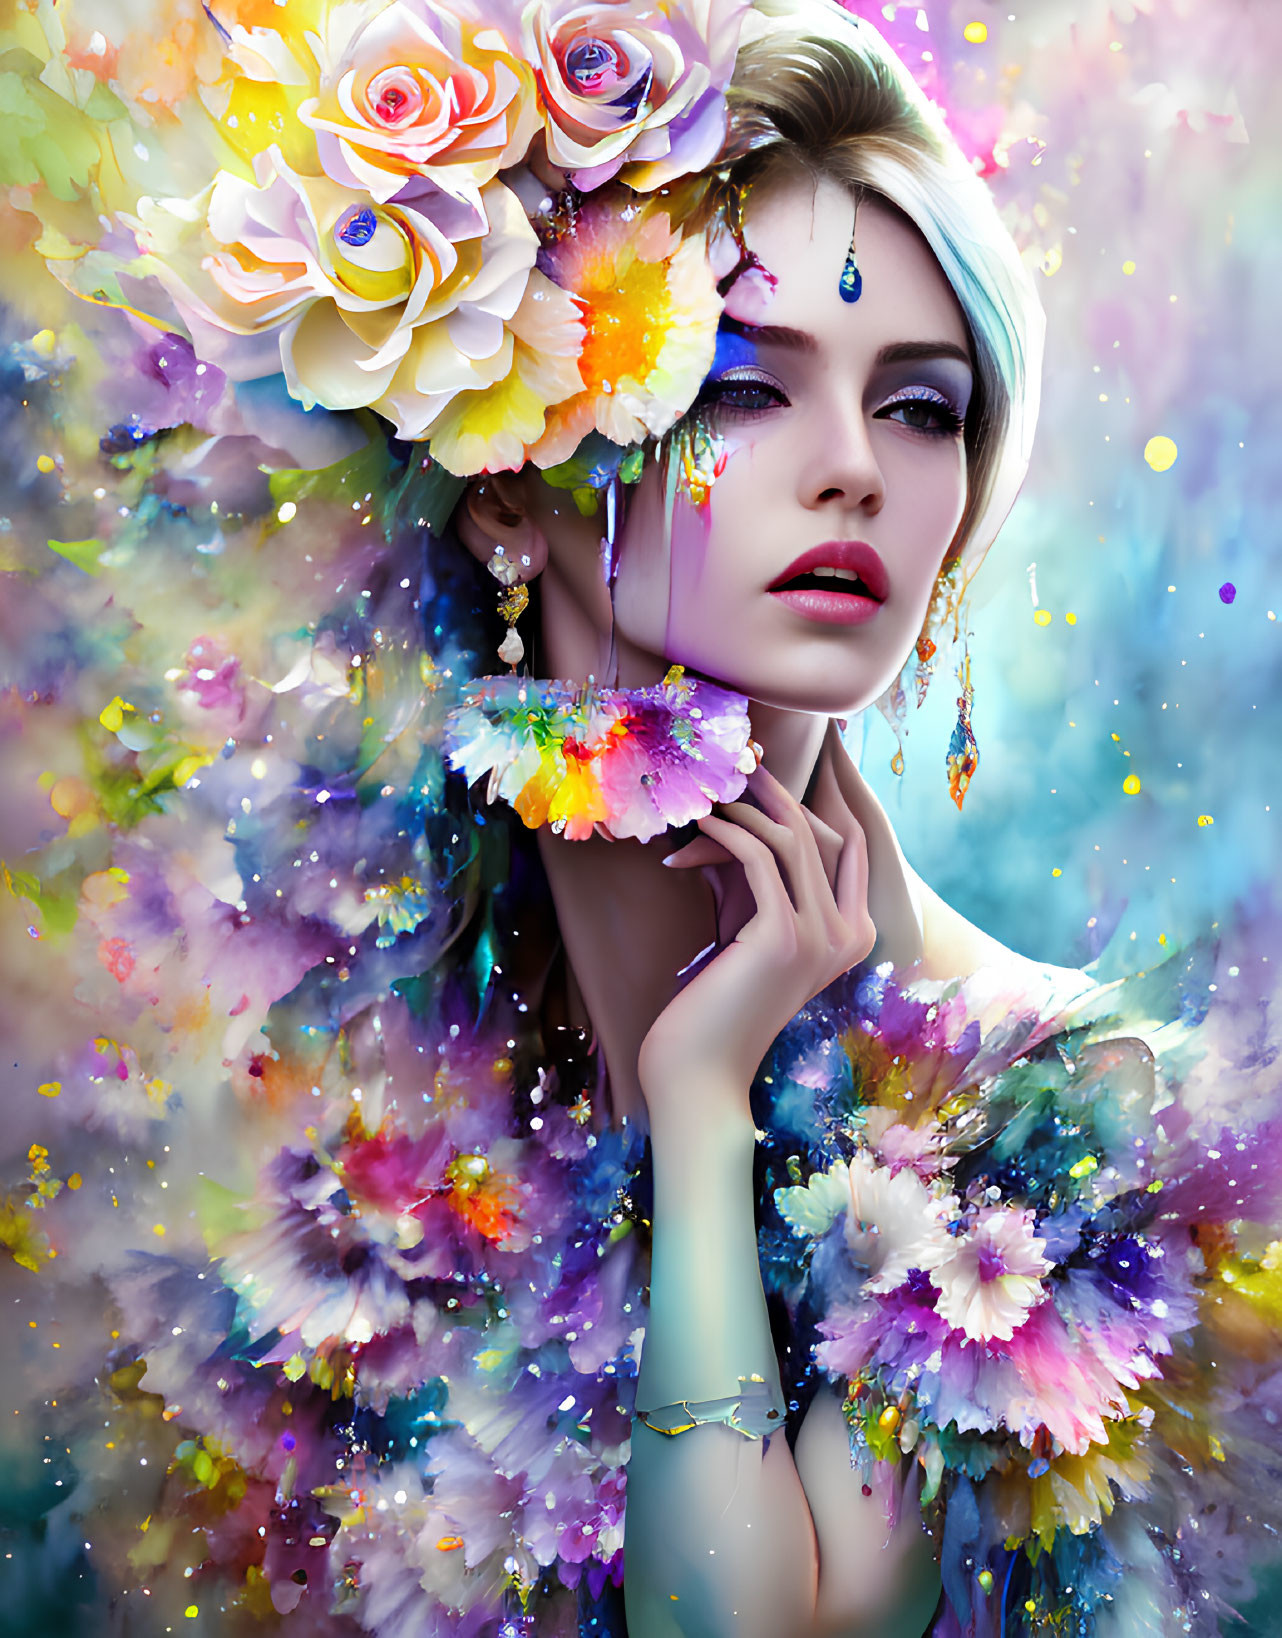 Vibrant digital art portrait of a woman with floral hair and sparkling jewelry